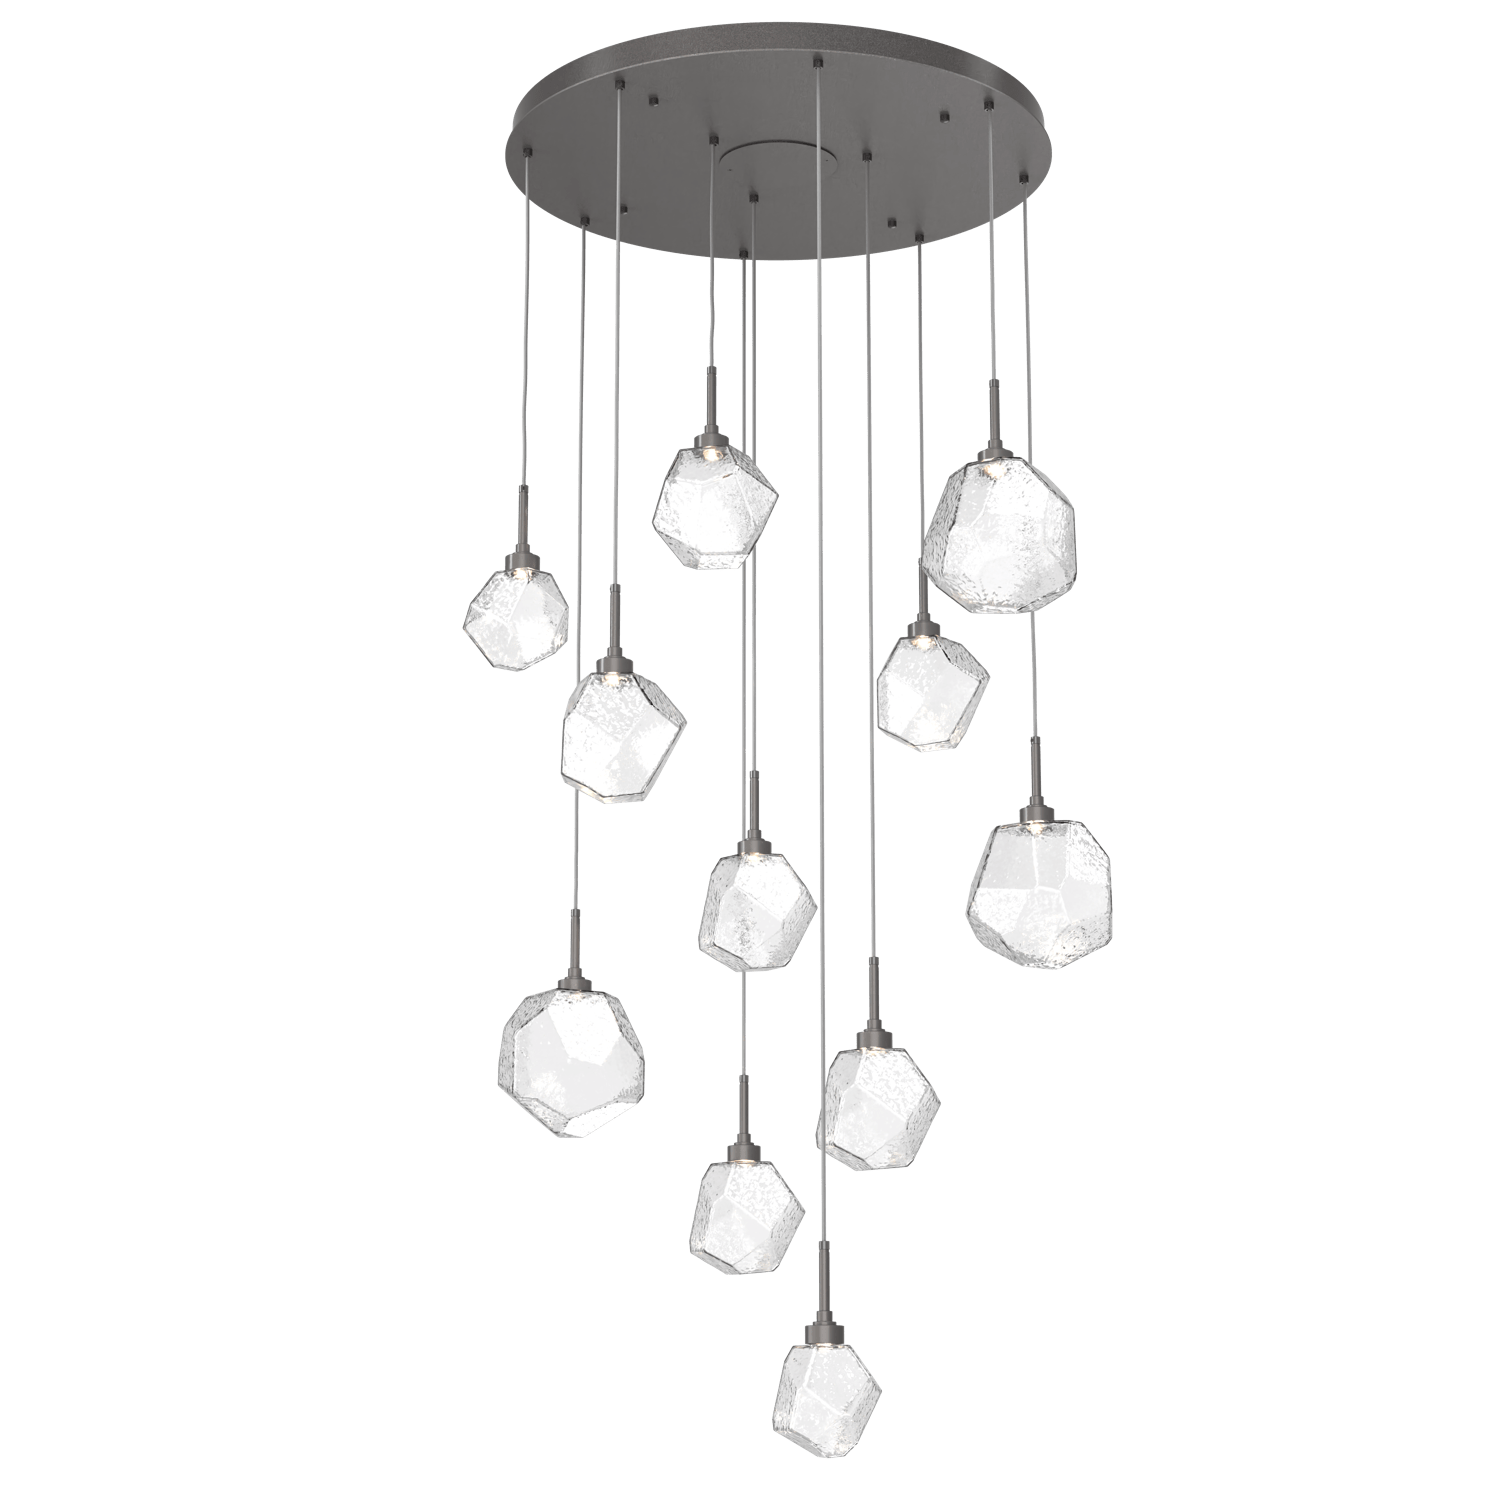 CHB0039-11-GP-C-Hammerton-Studio-Gem-11-light-round-pendant-chandelier-with-graphite-finish-and-clear-blown-glass-shades-and-LED-lamping